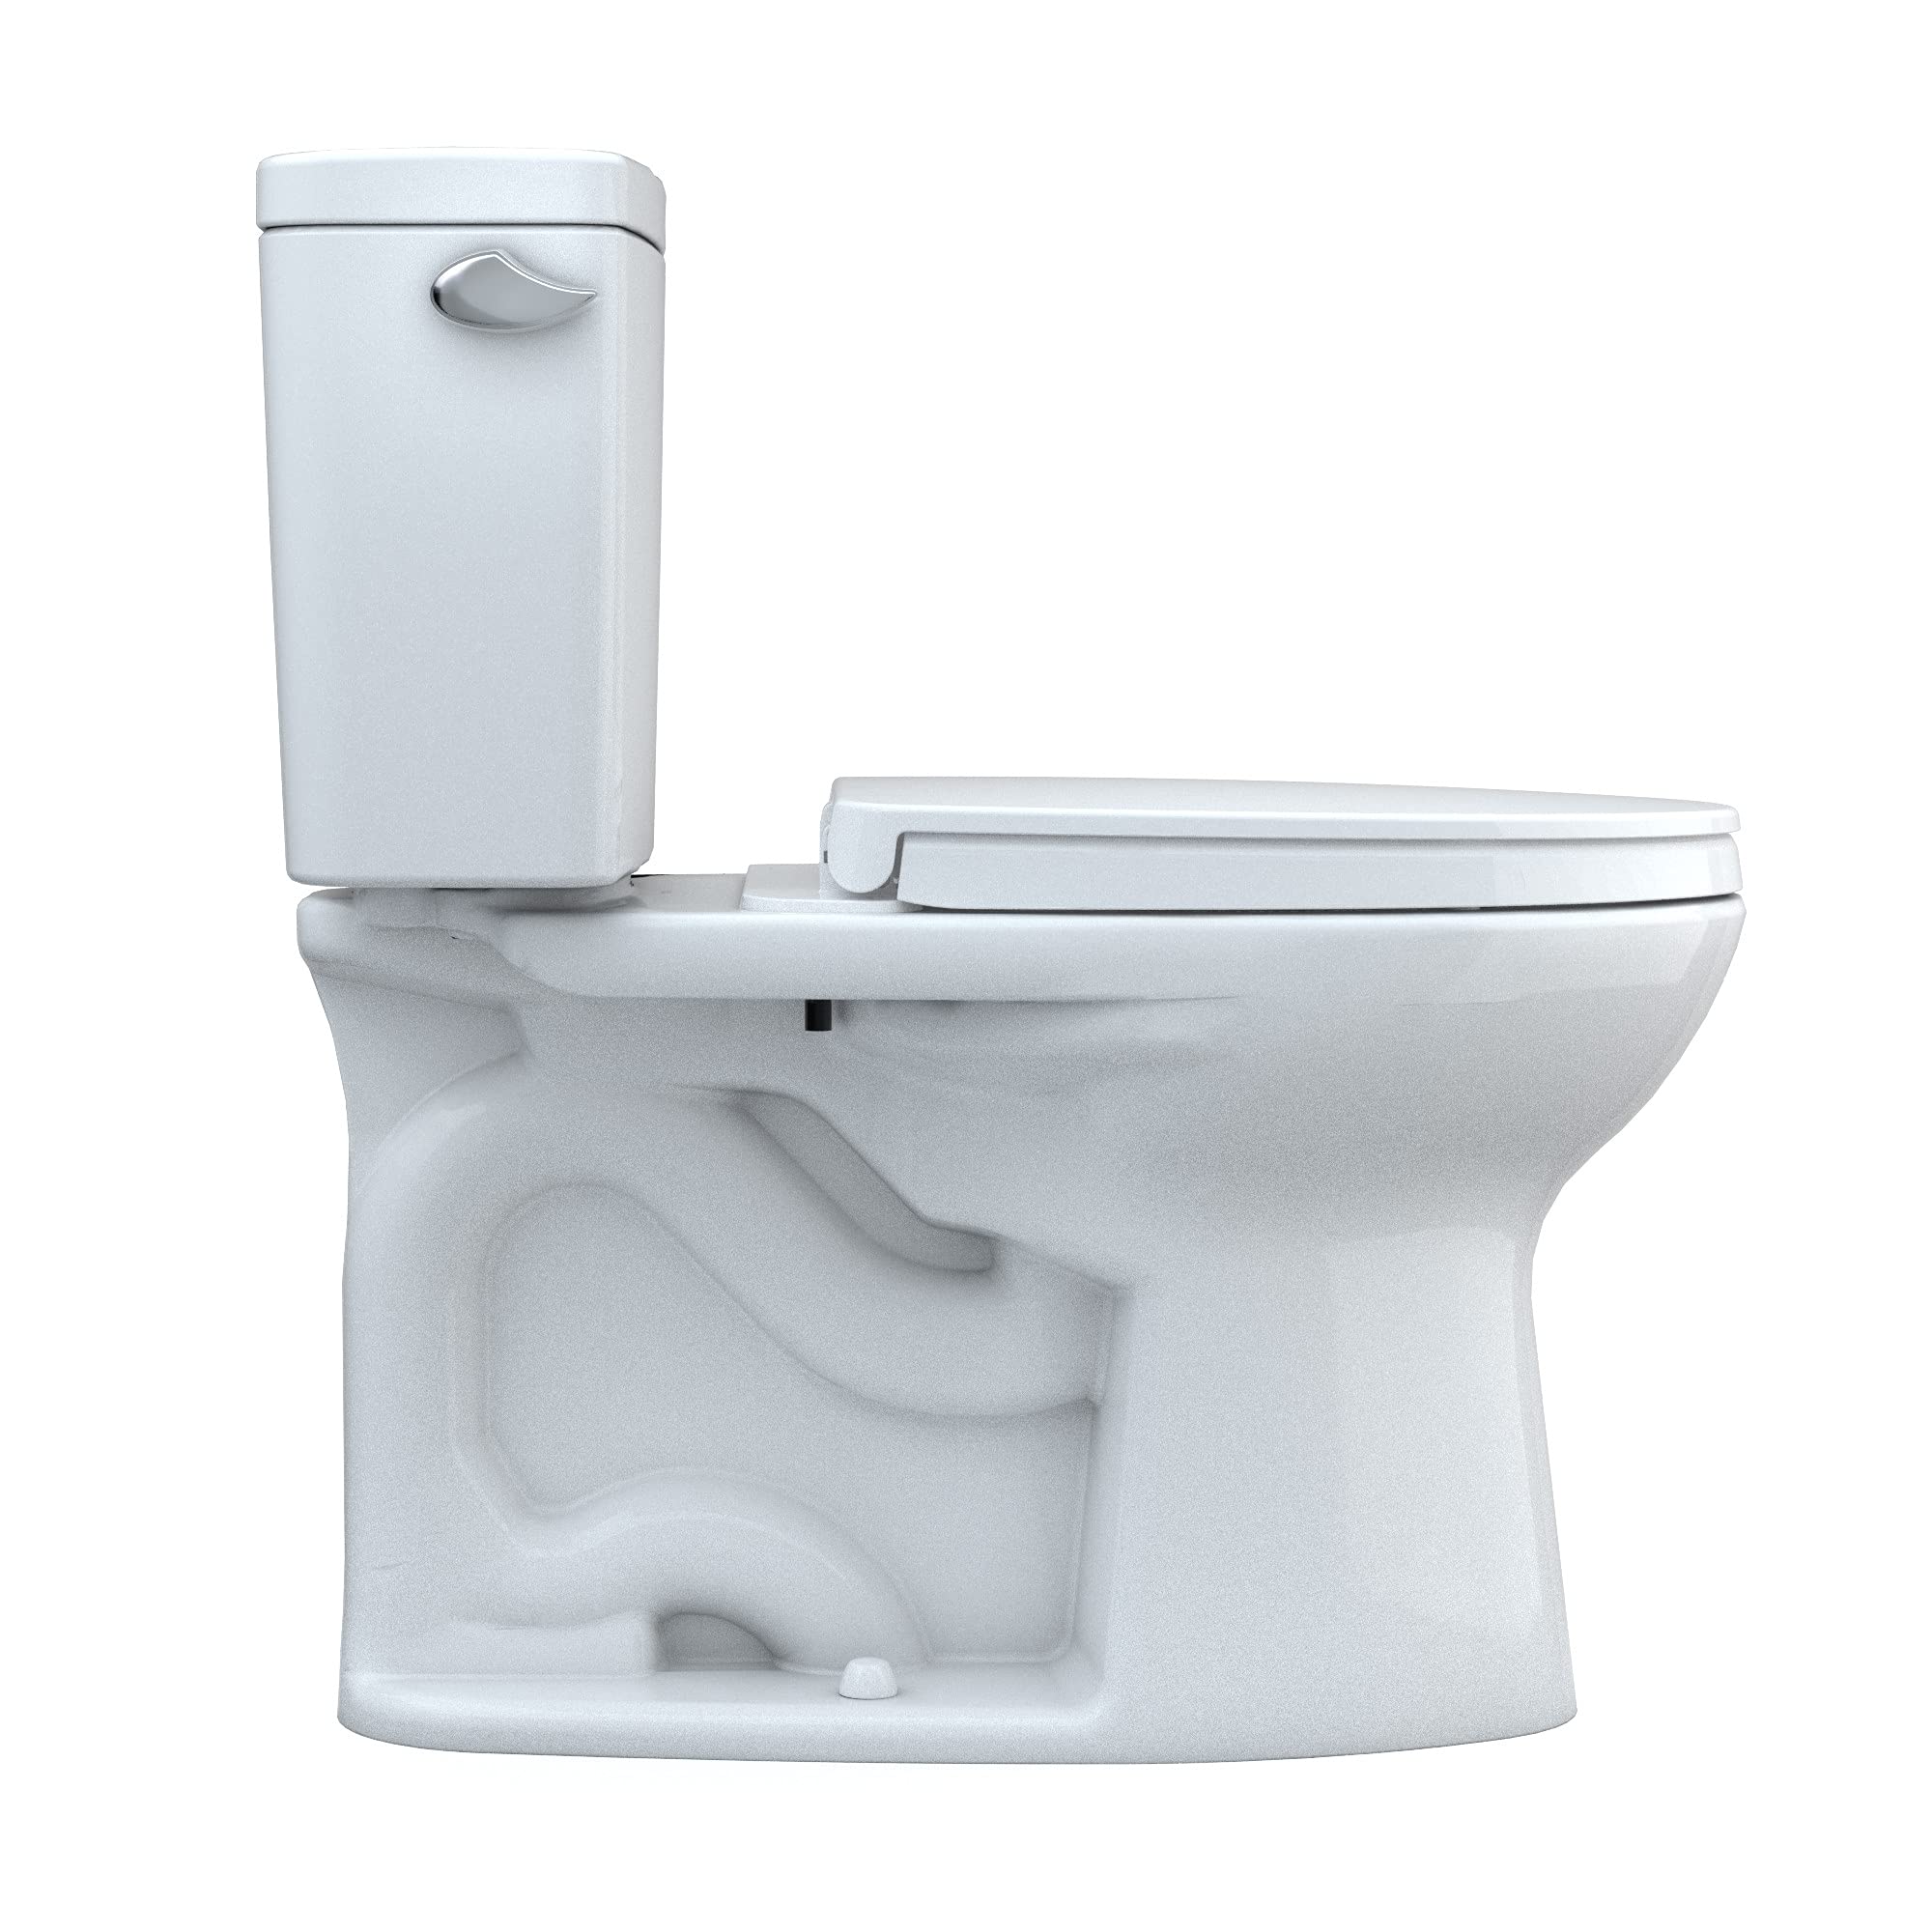 TOTO Drake Two-Piece Elongated 1.28 GPF TORNADO FLUSH Toilet with CEFIONTECT and SoftClose Seat, WASHLET+ Ready, Cotton White - MS776124CEG#01